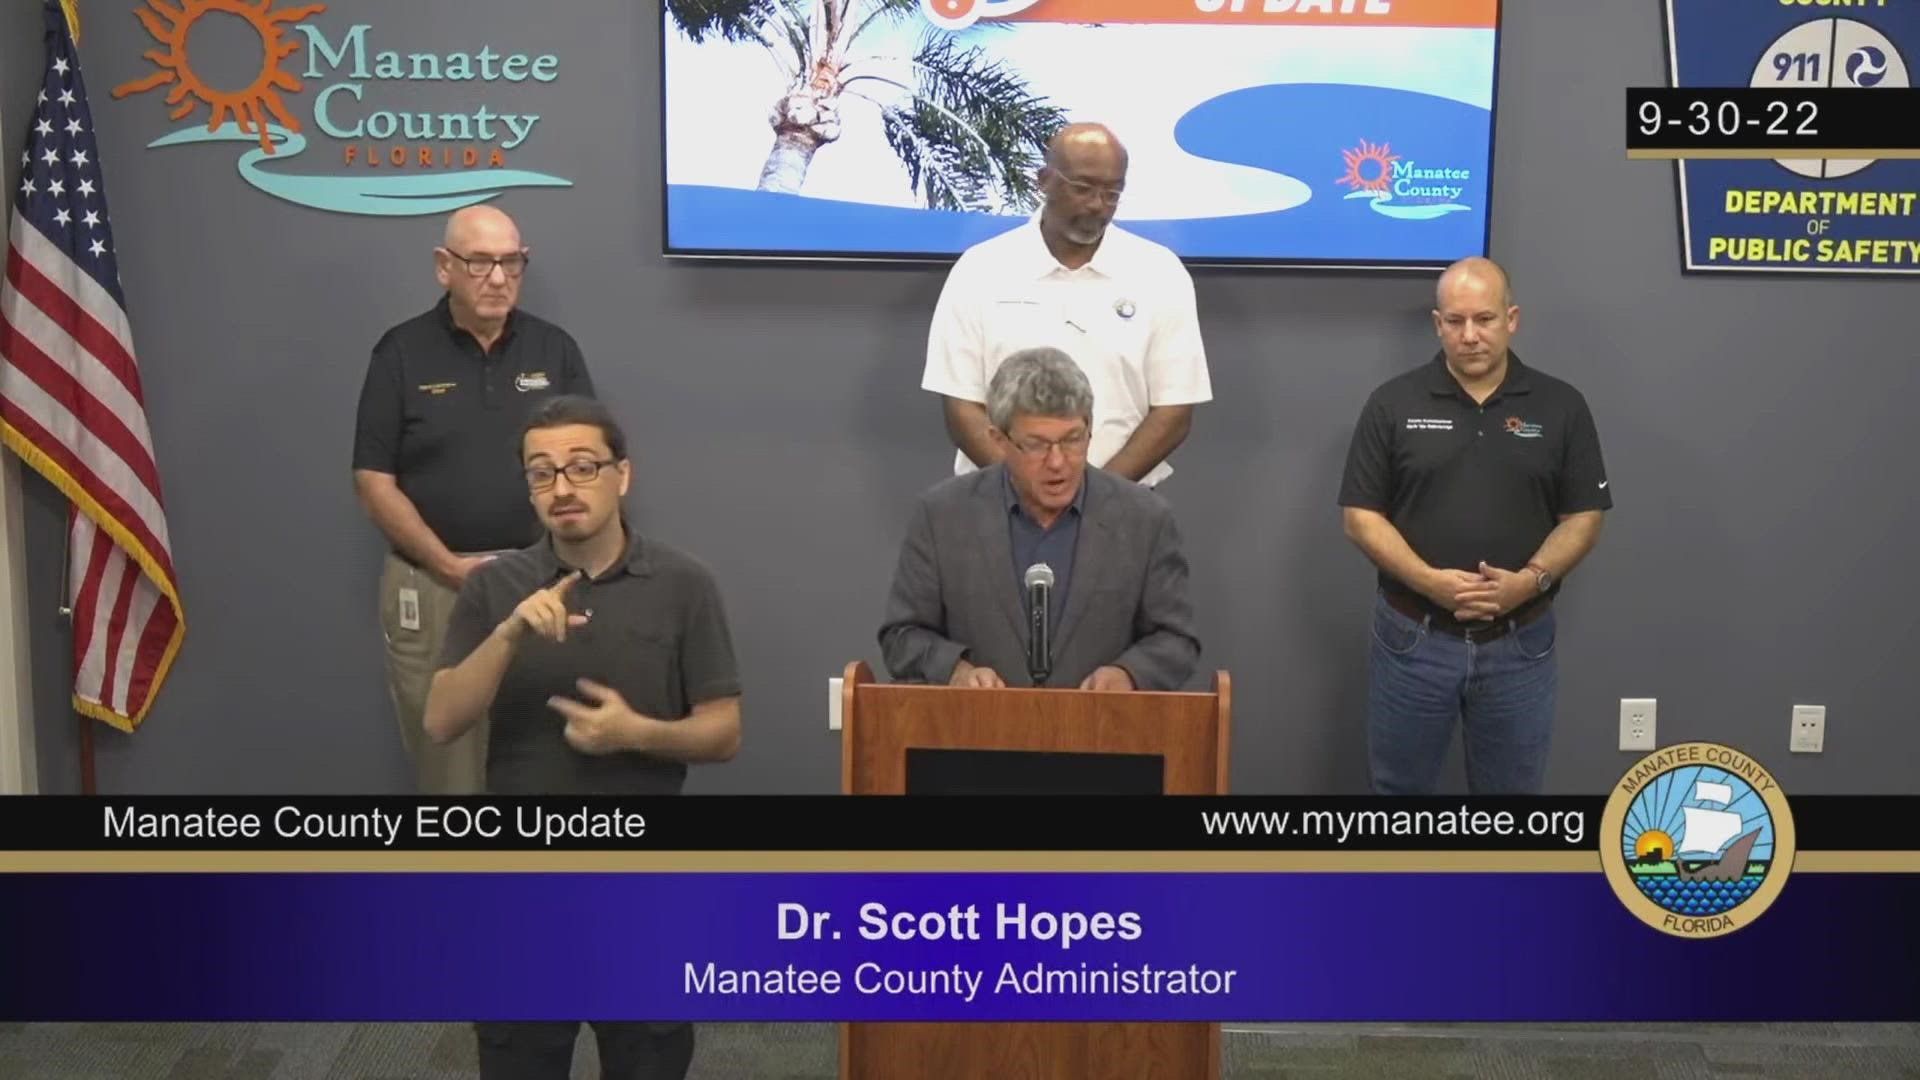 Dr. Scott Hopes said "significant" infrastructure damage to the county's power systems will hinder restoration.